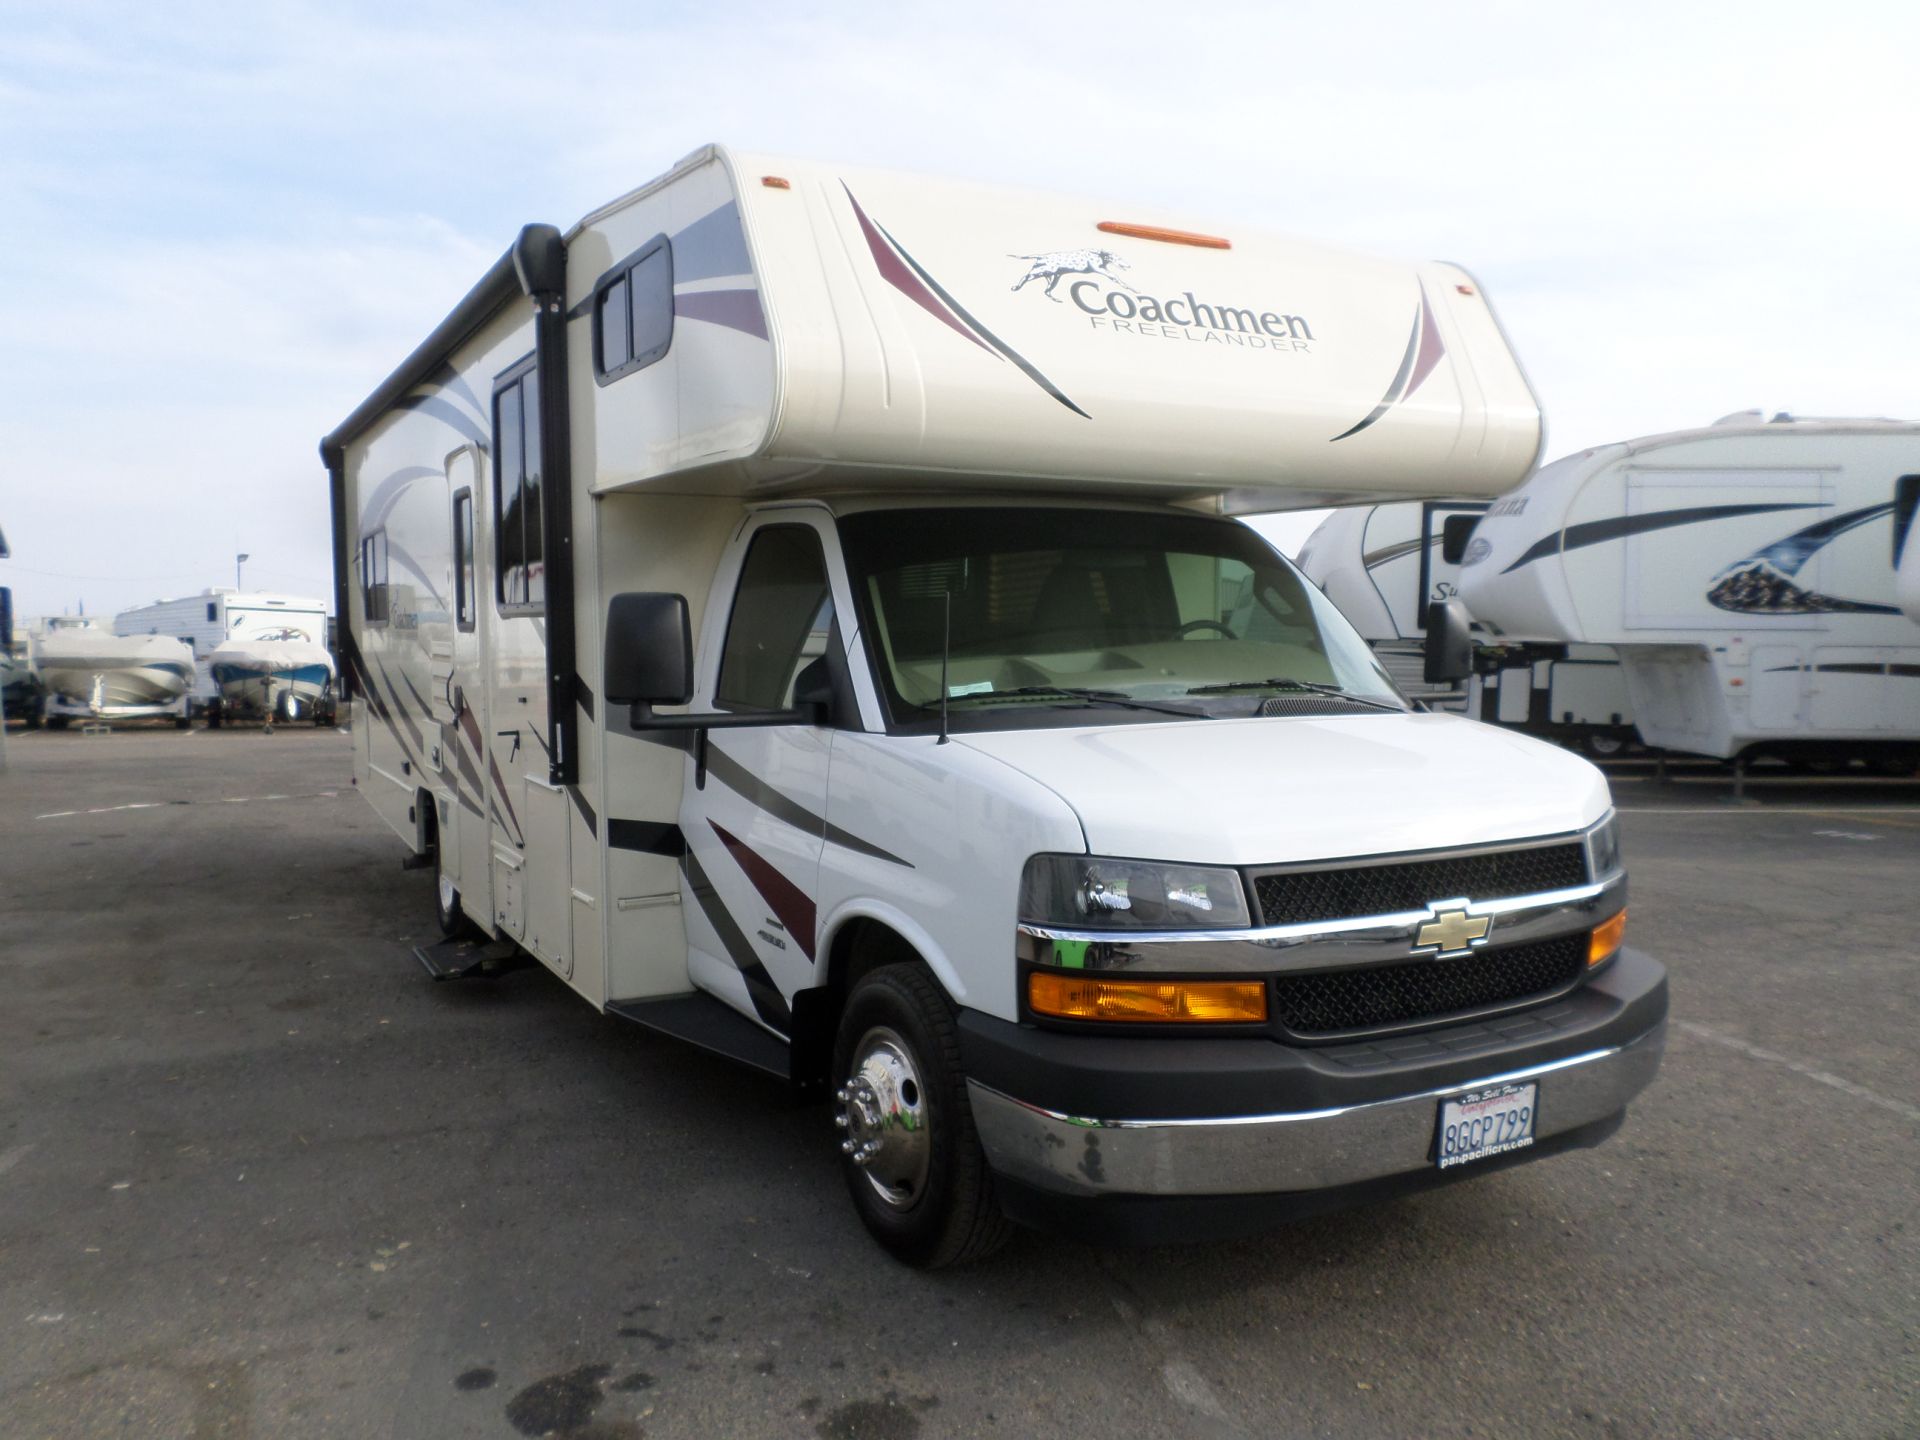 RV for sale: 2019 Coachmen Freelander 27QB Class C Motorhome 30' in Class C Rvs For Sale By Owner